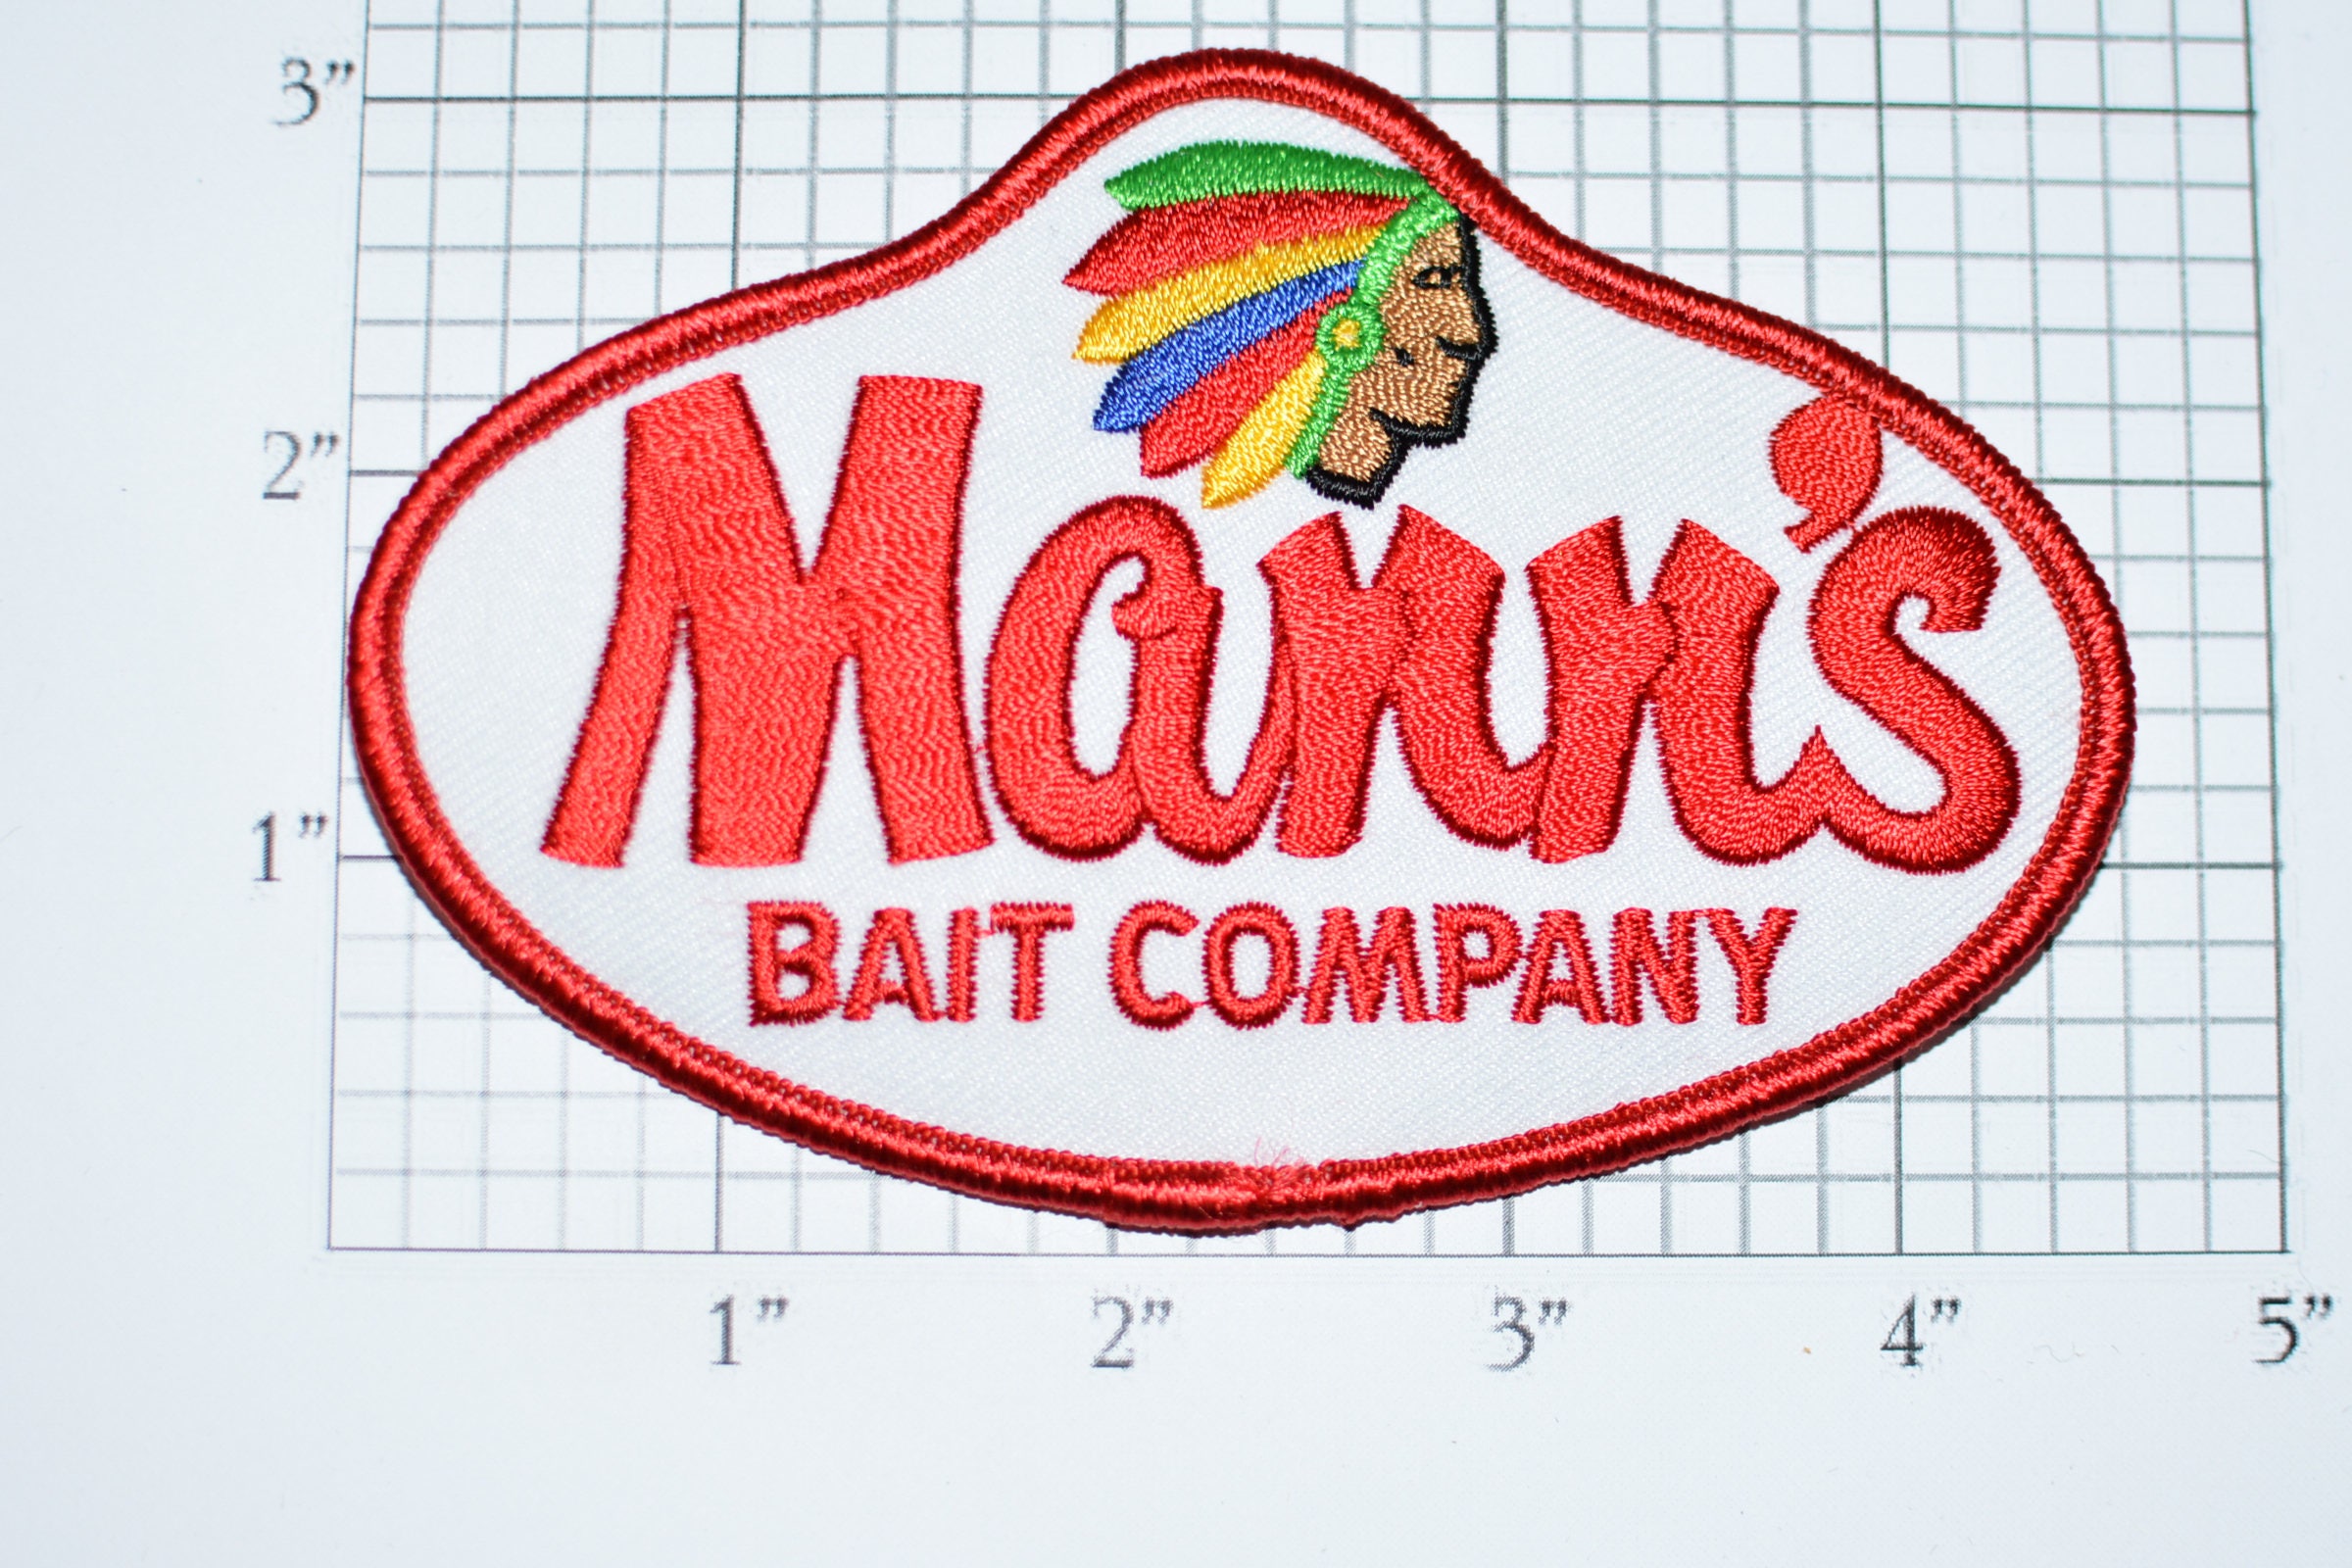 Mann's Bait Company Fishing Tackle Gear Iron-on Embroidered Clothing Patch  for Jacket Shirt Hat Vest Backpack Gift Idea Men Guys Dad e28b